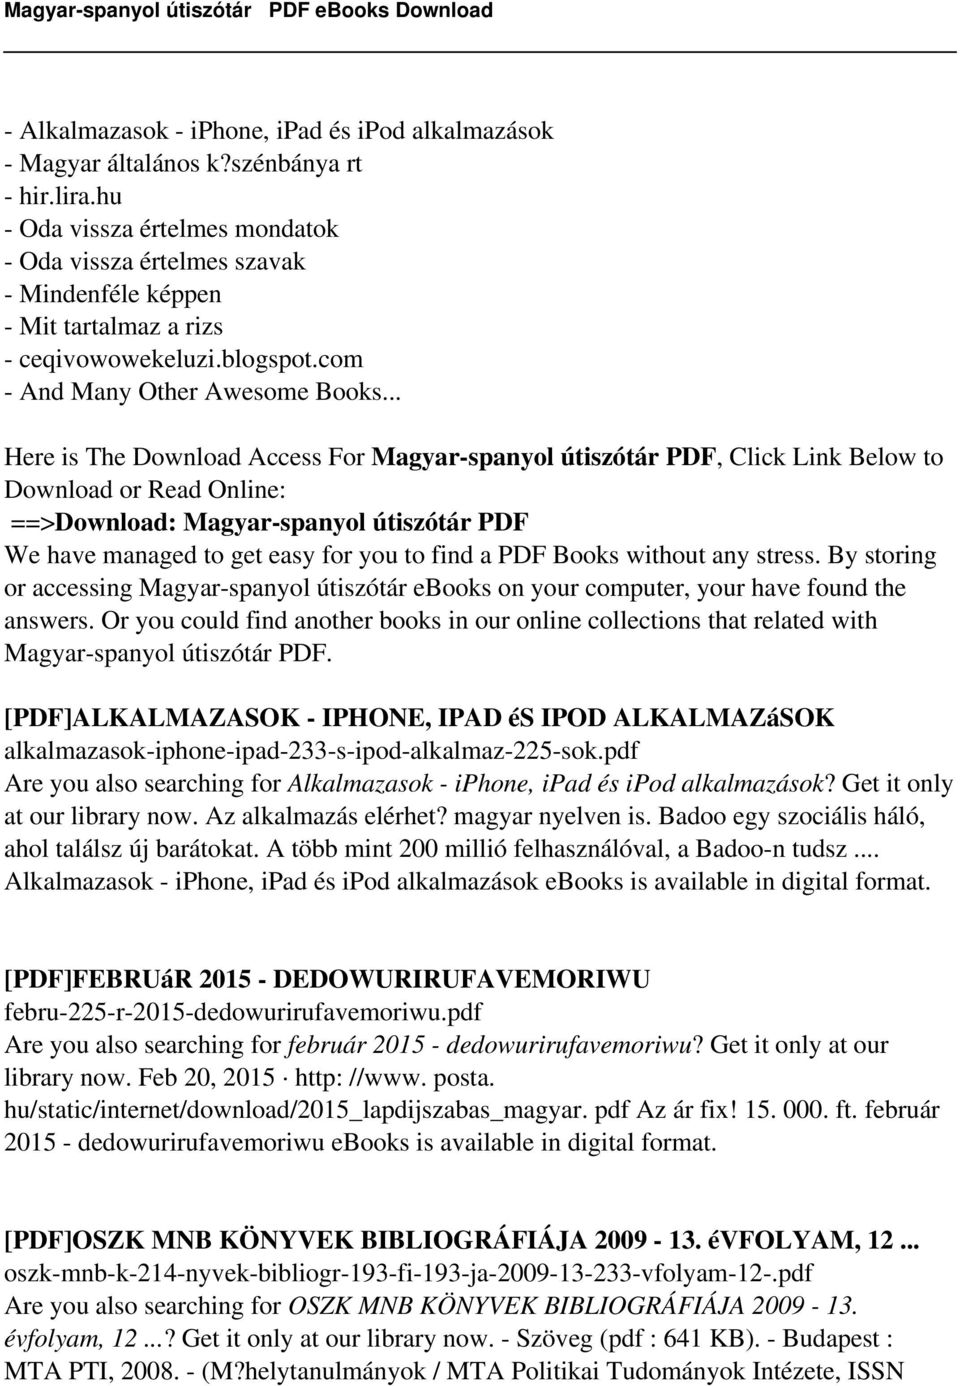 .. Here is The Download Access For Magyar-spanyol útiszótár PDF, Click Link Below to Download or Read Online: ==>Download: Magyar-spanyol útiszótár PDF We have managed to get easy for you to find a